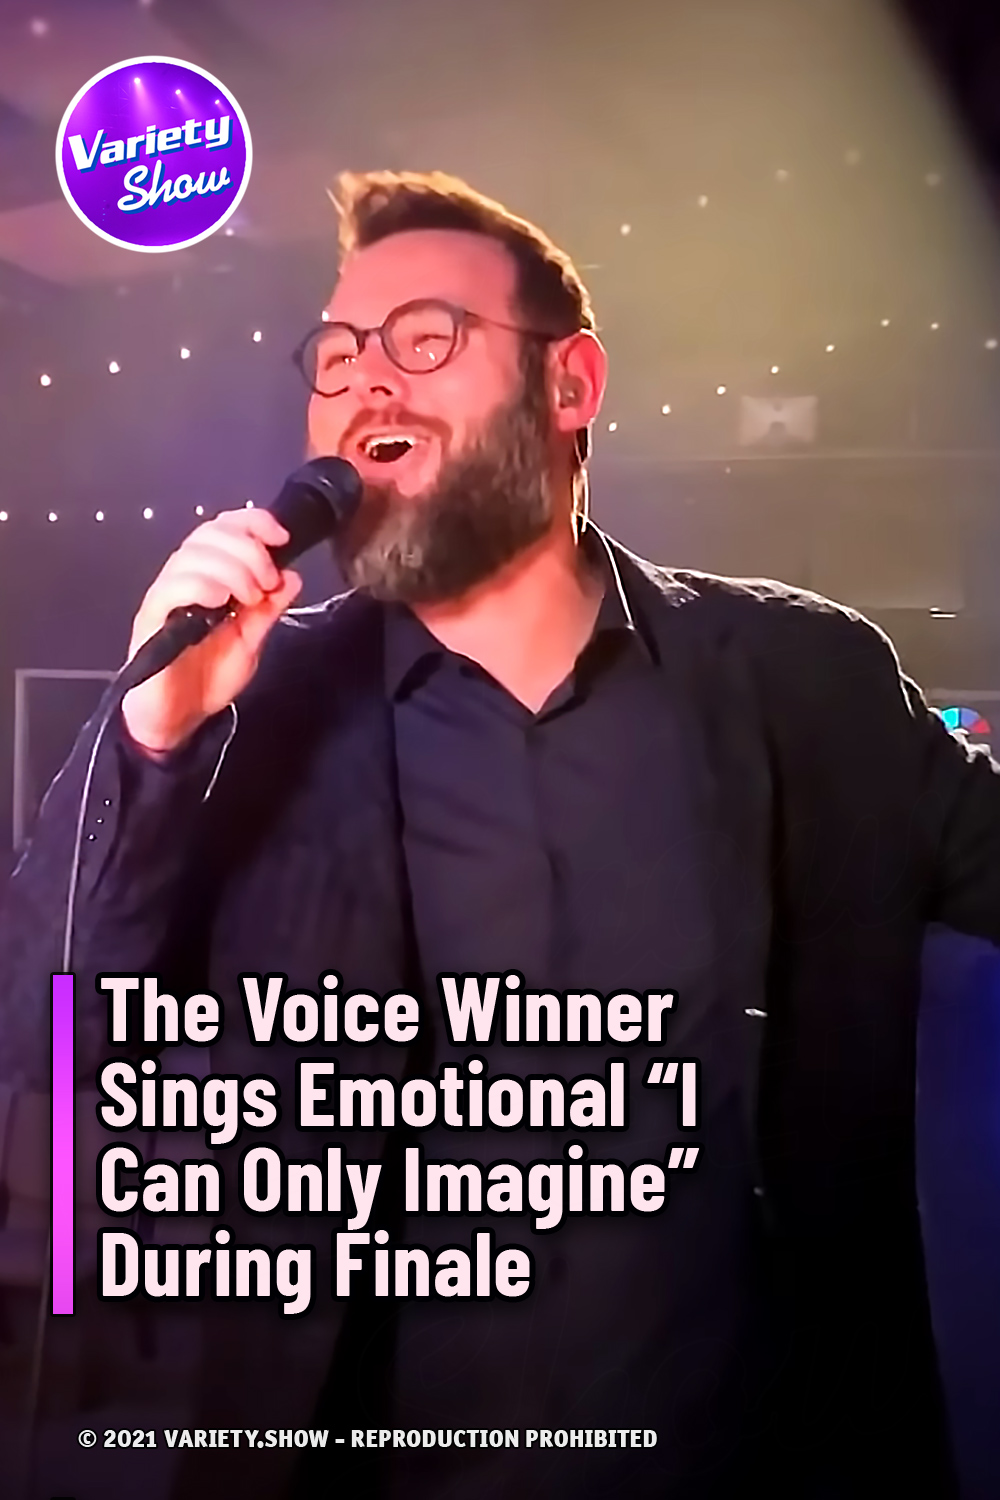 The Voice Winner Sings Emotional “I Can Only Imagine” During Finale